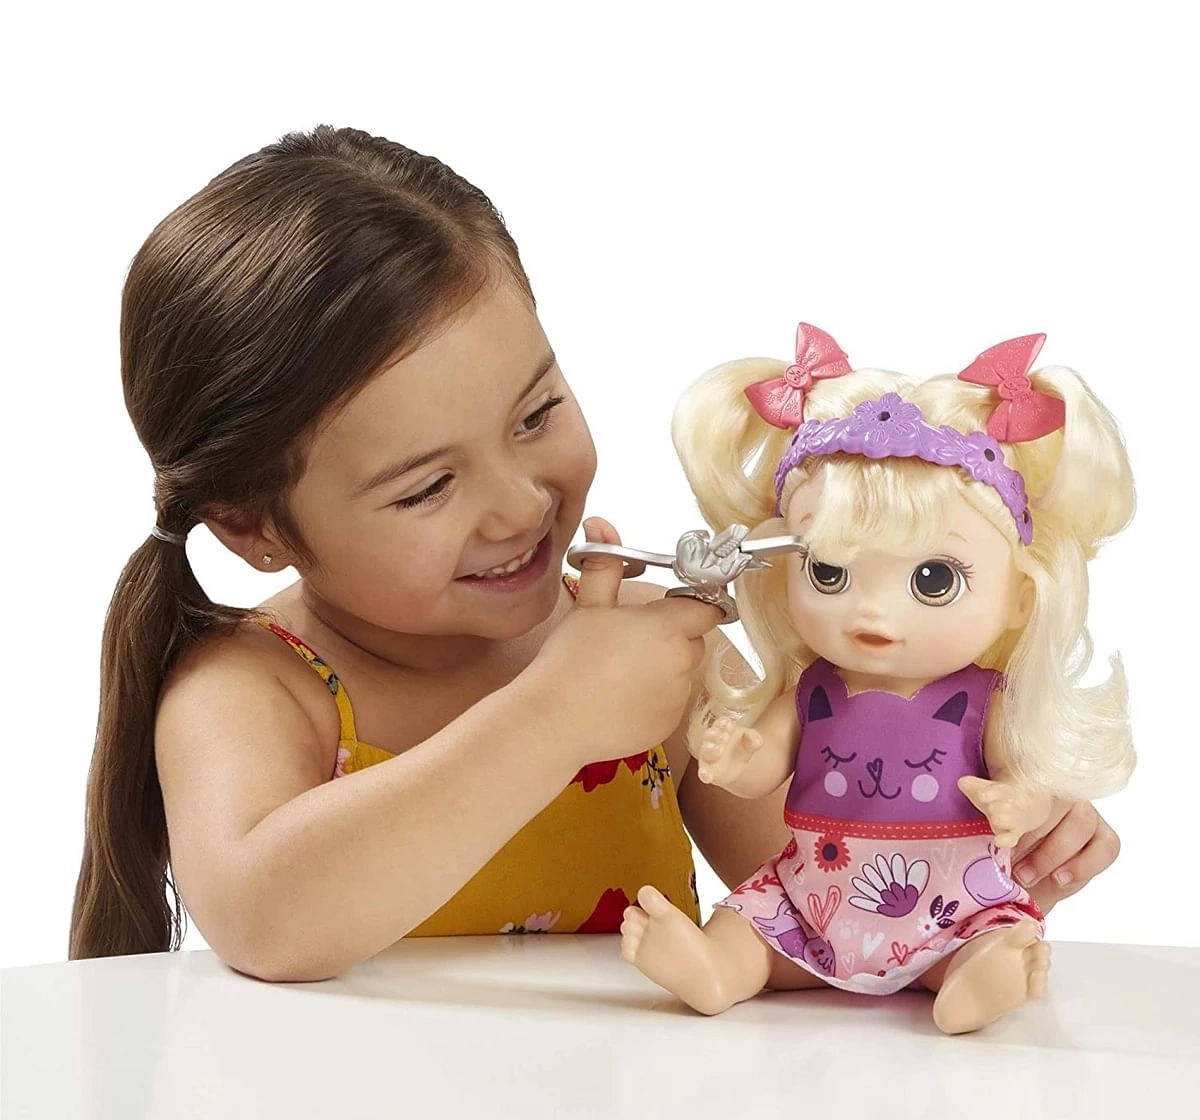 Baby Alive Snip and Style Baby Blonde Hair Toy for Kids above 3Y+, Multicolour